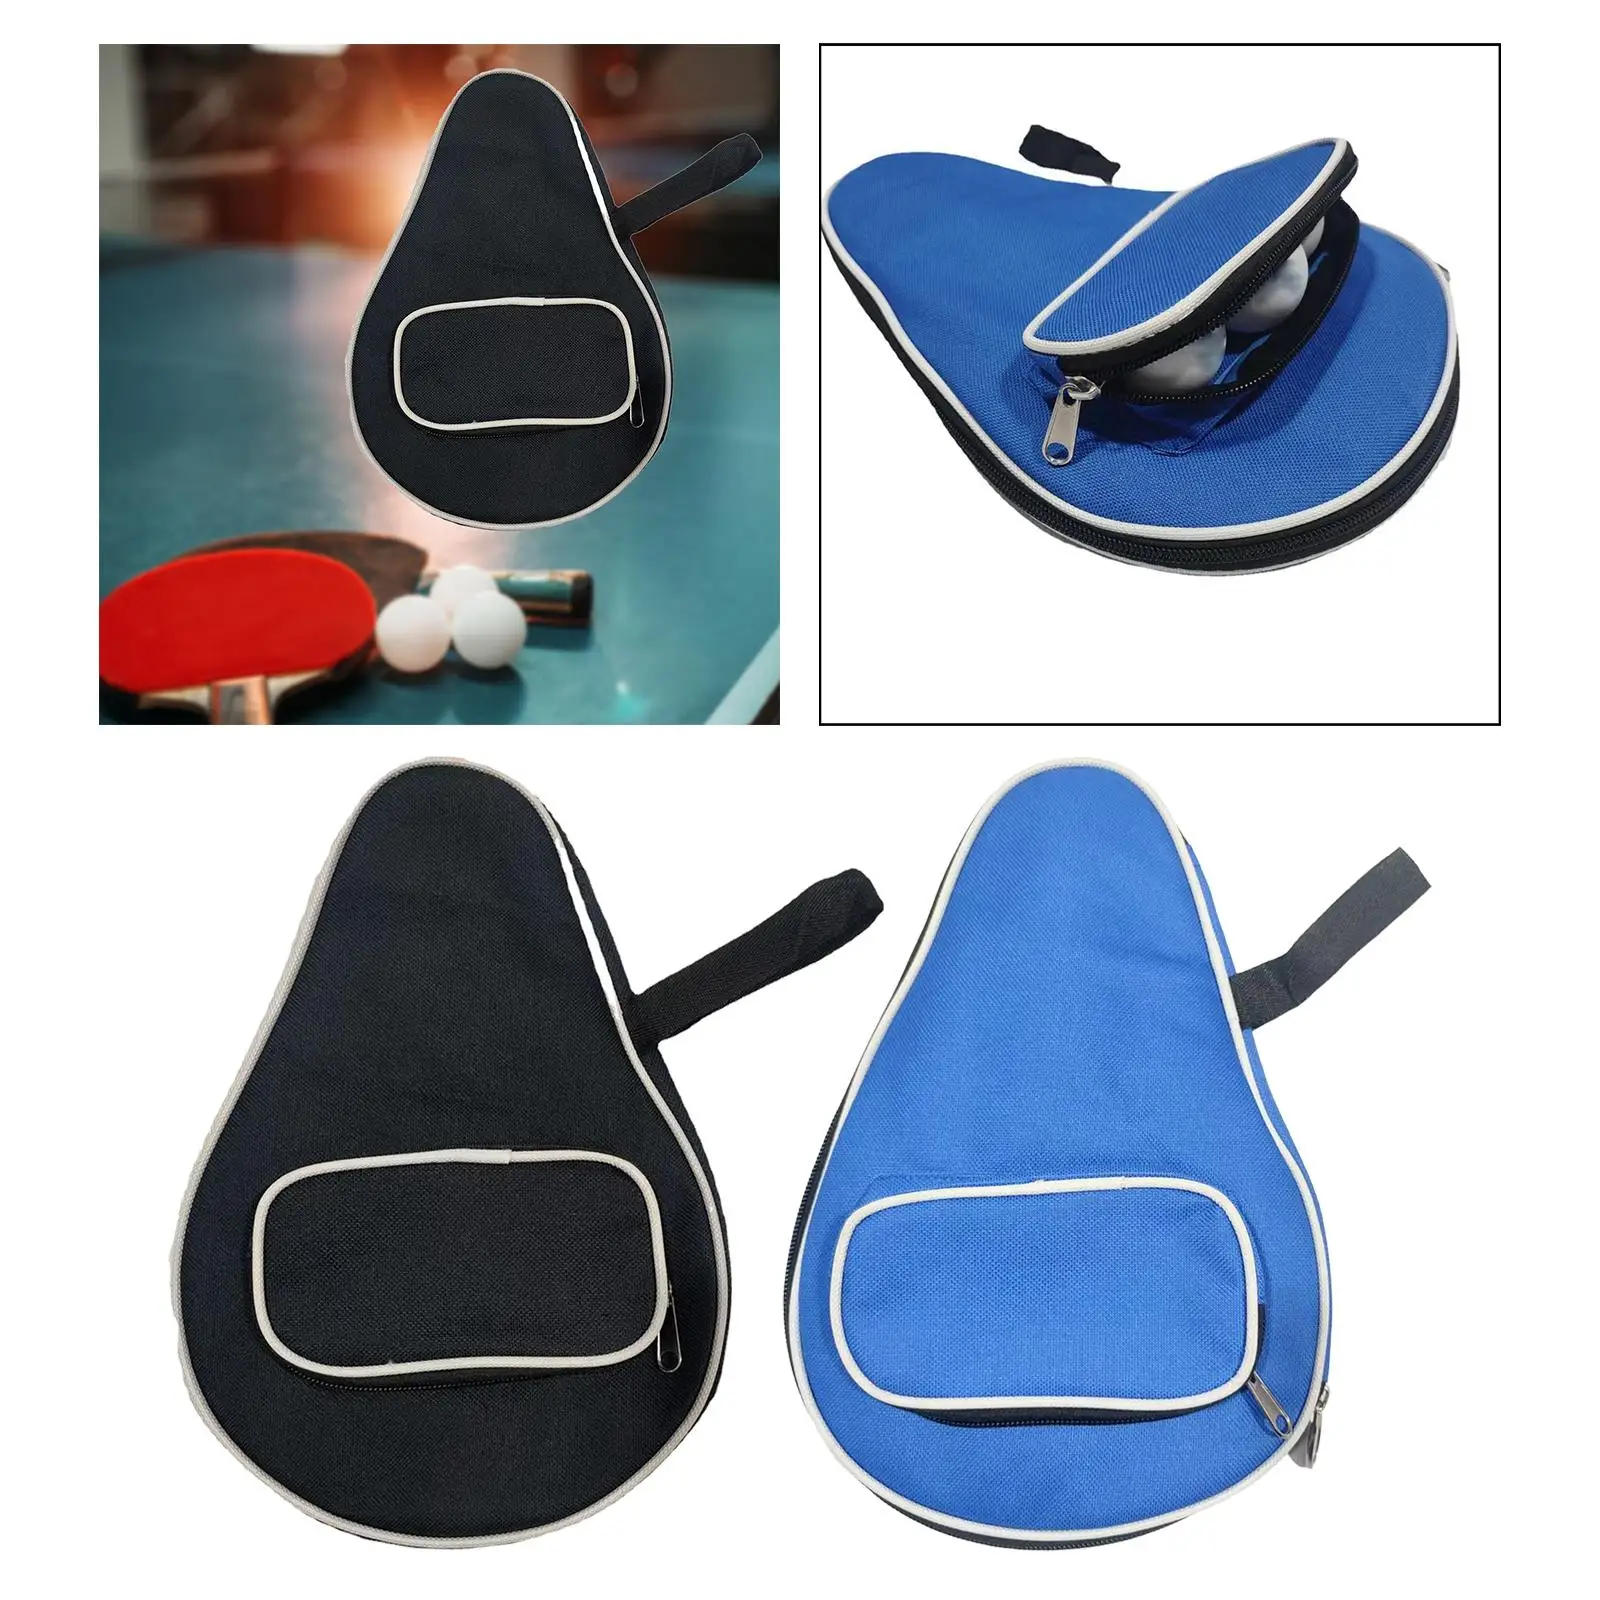 Table Tennis Racket Cover Multifunction Lightweight Table Tennis Paddle Case Racket Pouch for Competition Training Indoor Travel